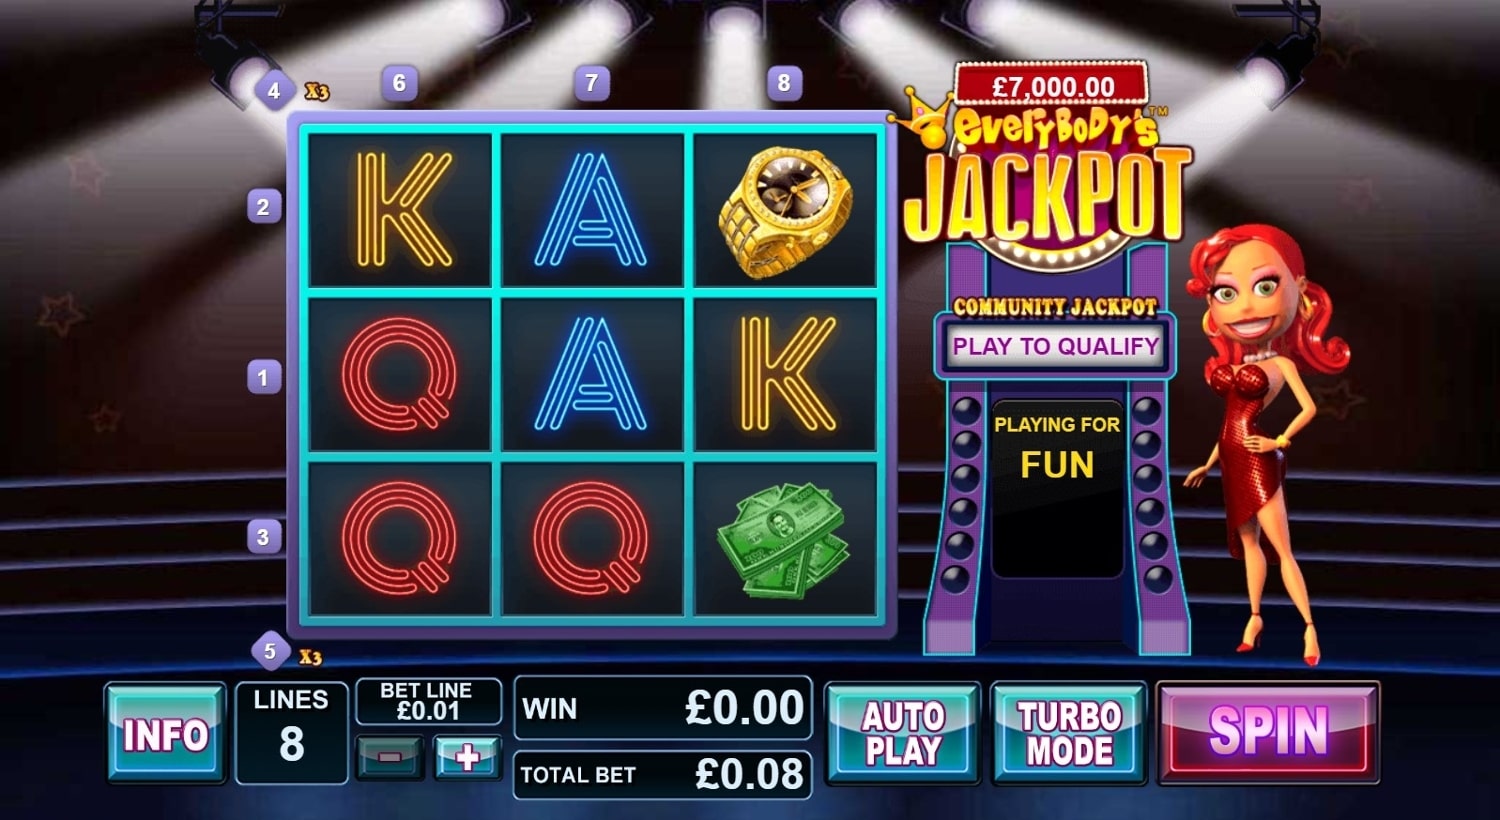 Everybody's Jackpot Free Spins